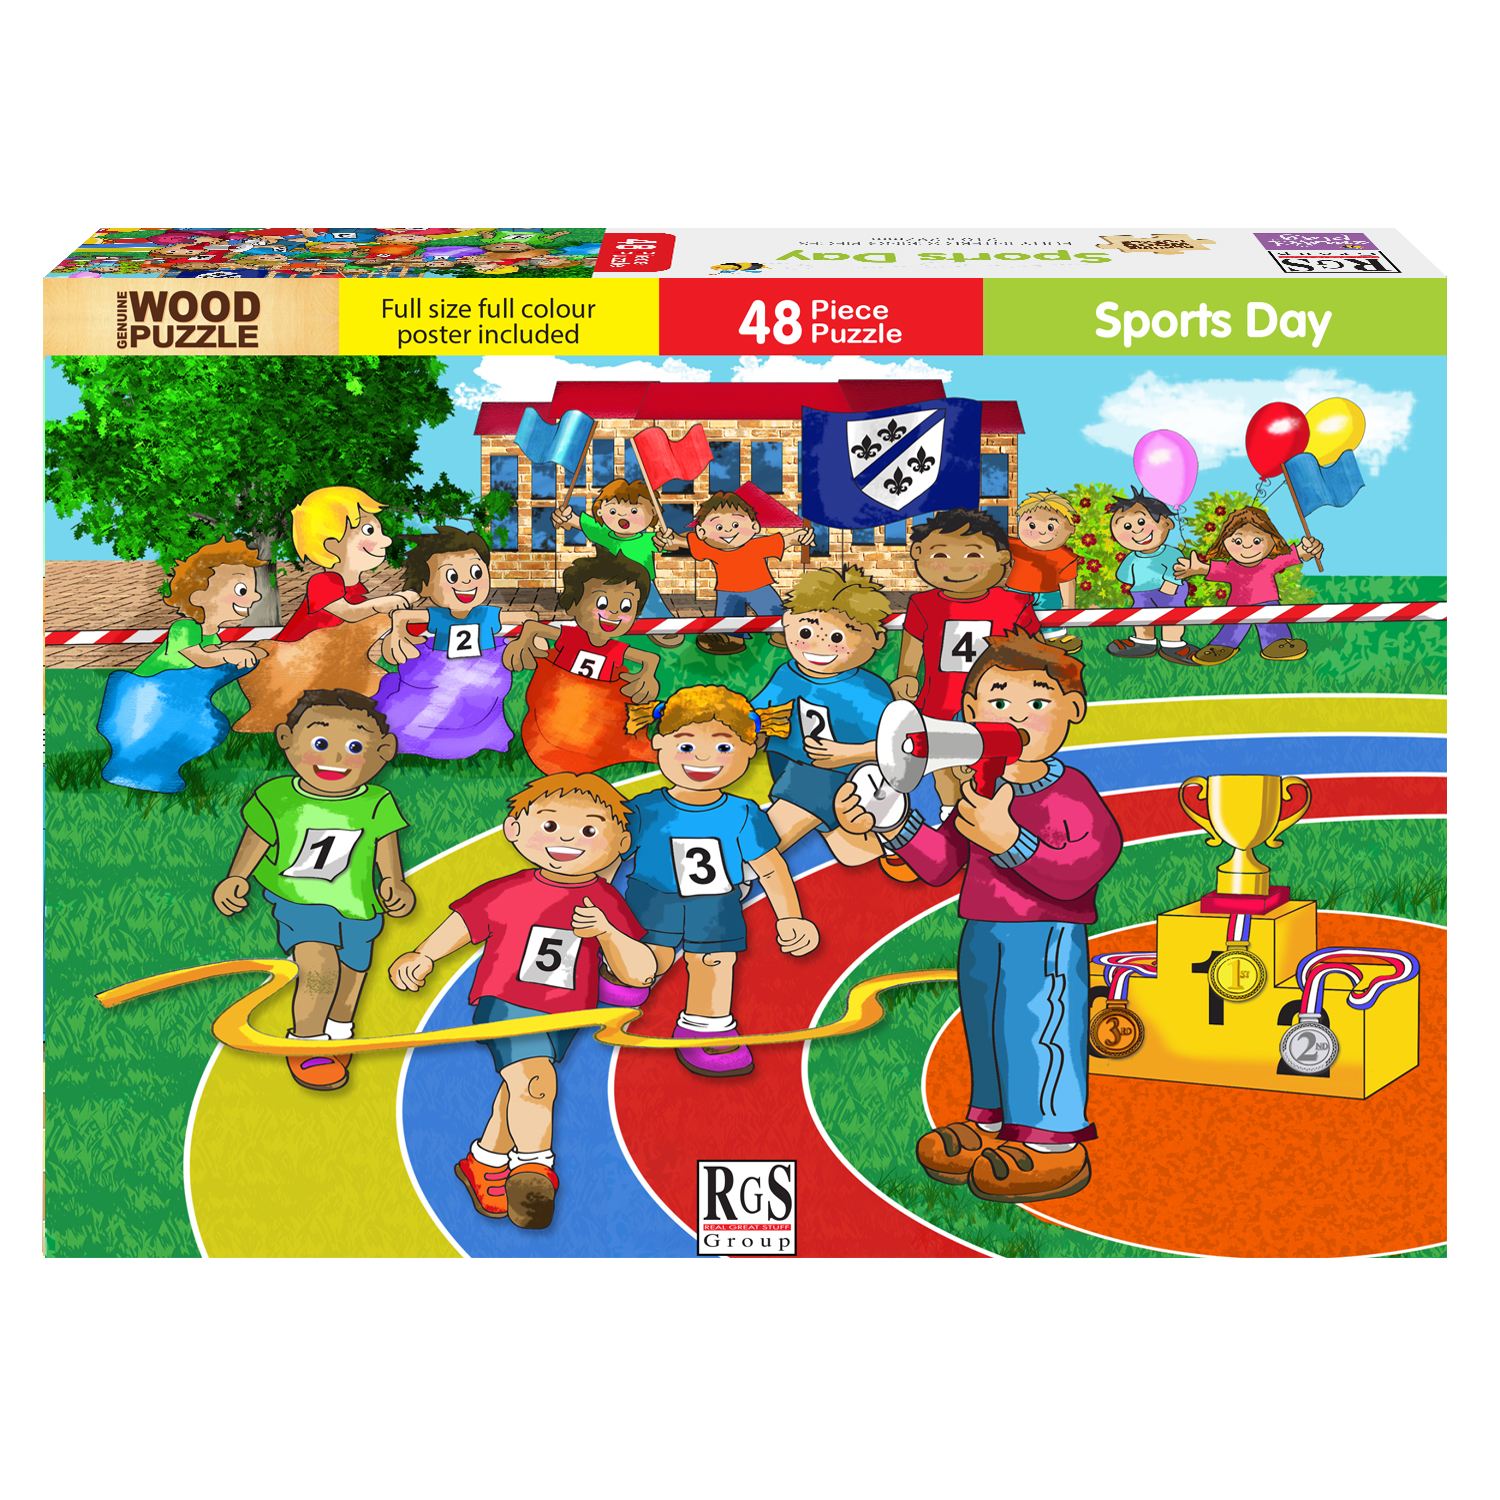 40 Piece - Sports Day Wooden Puzzle - Play School Room CC